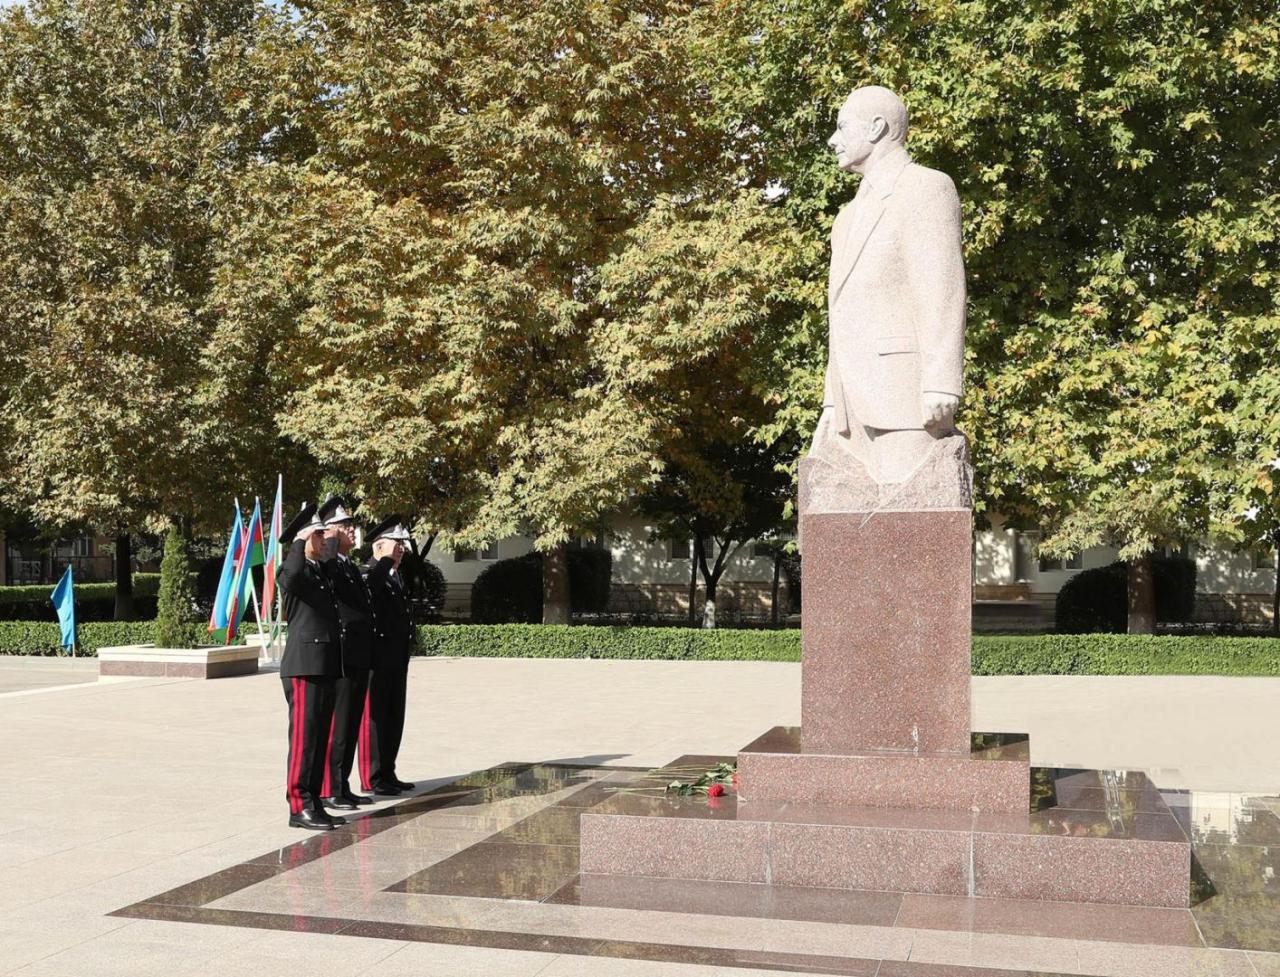 Heydar Aliyev Academy, Cultural Center of State Security Service hold events on Victory Day [PHOTO]